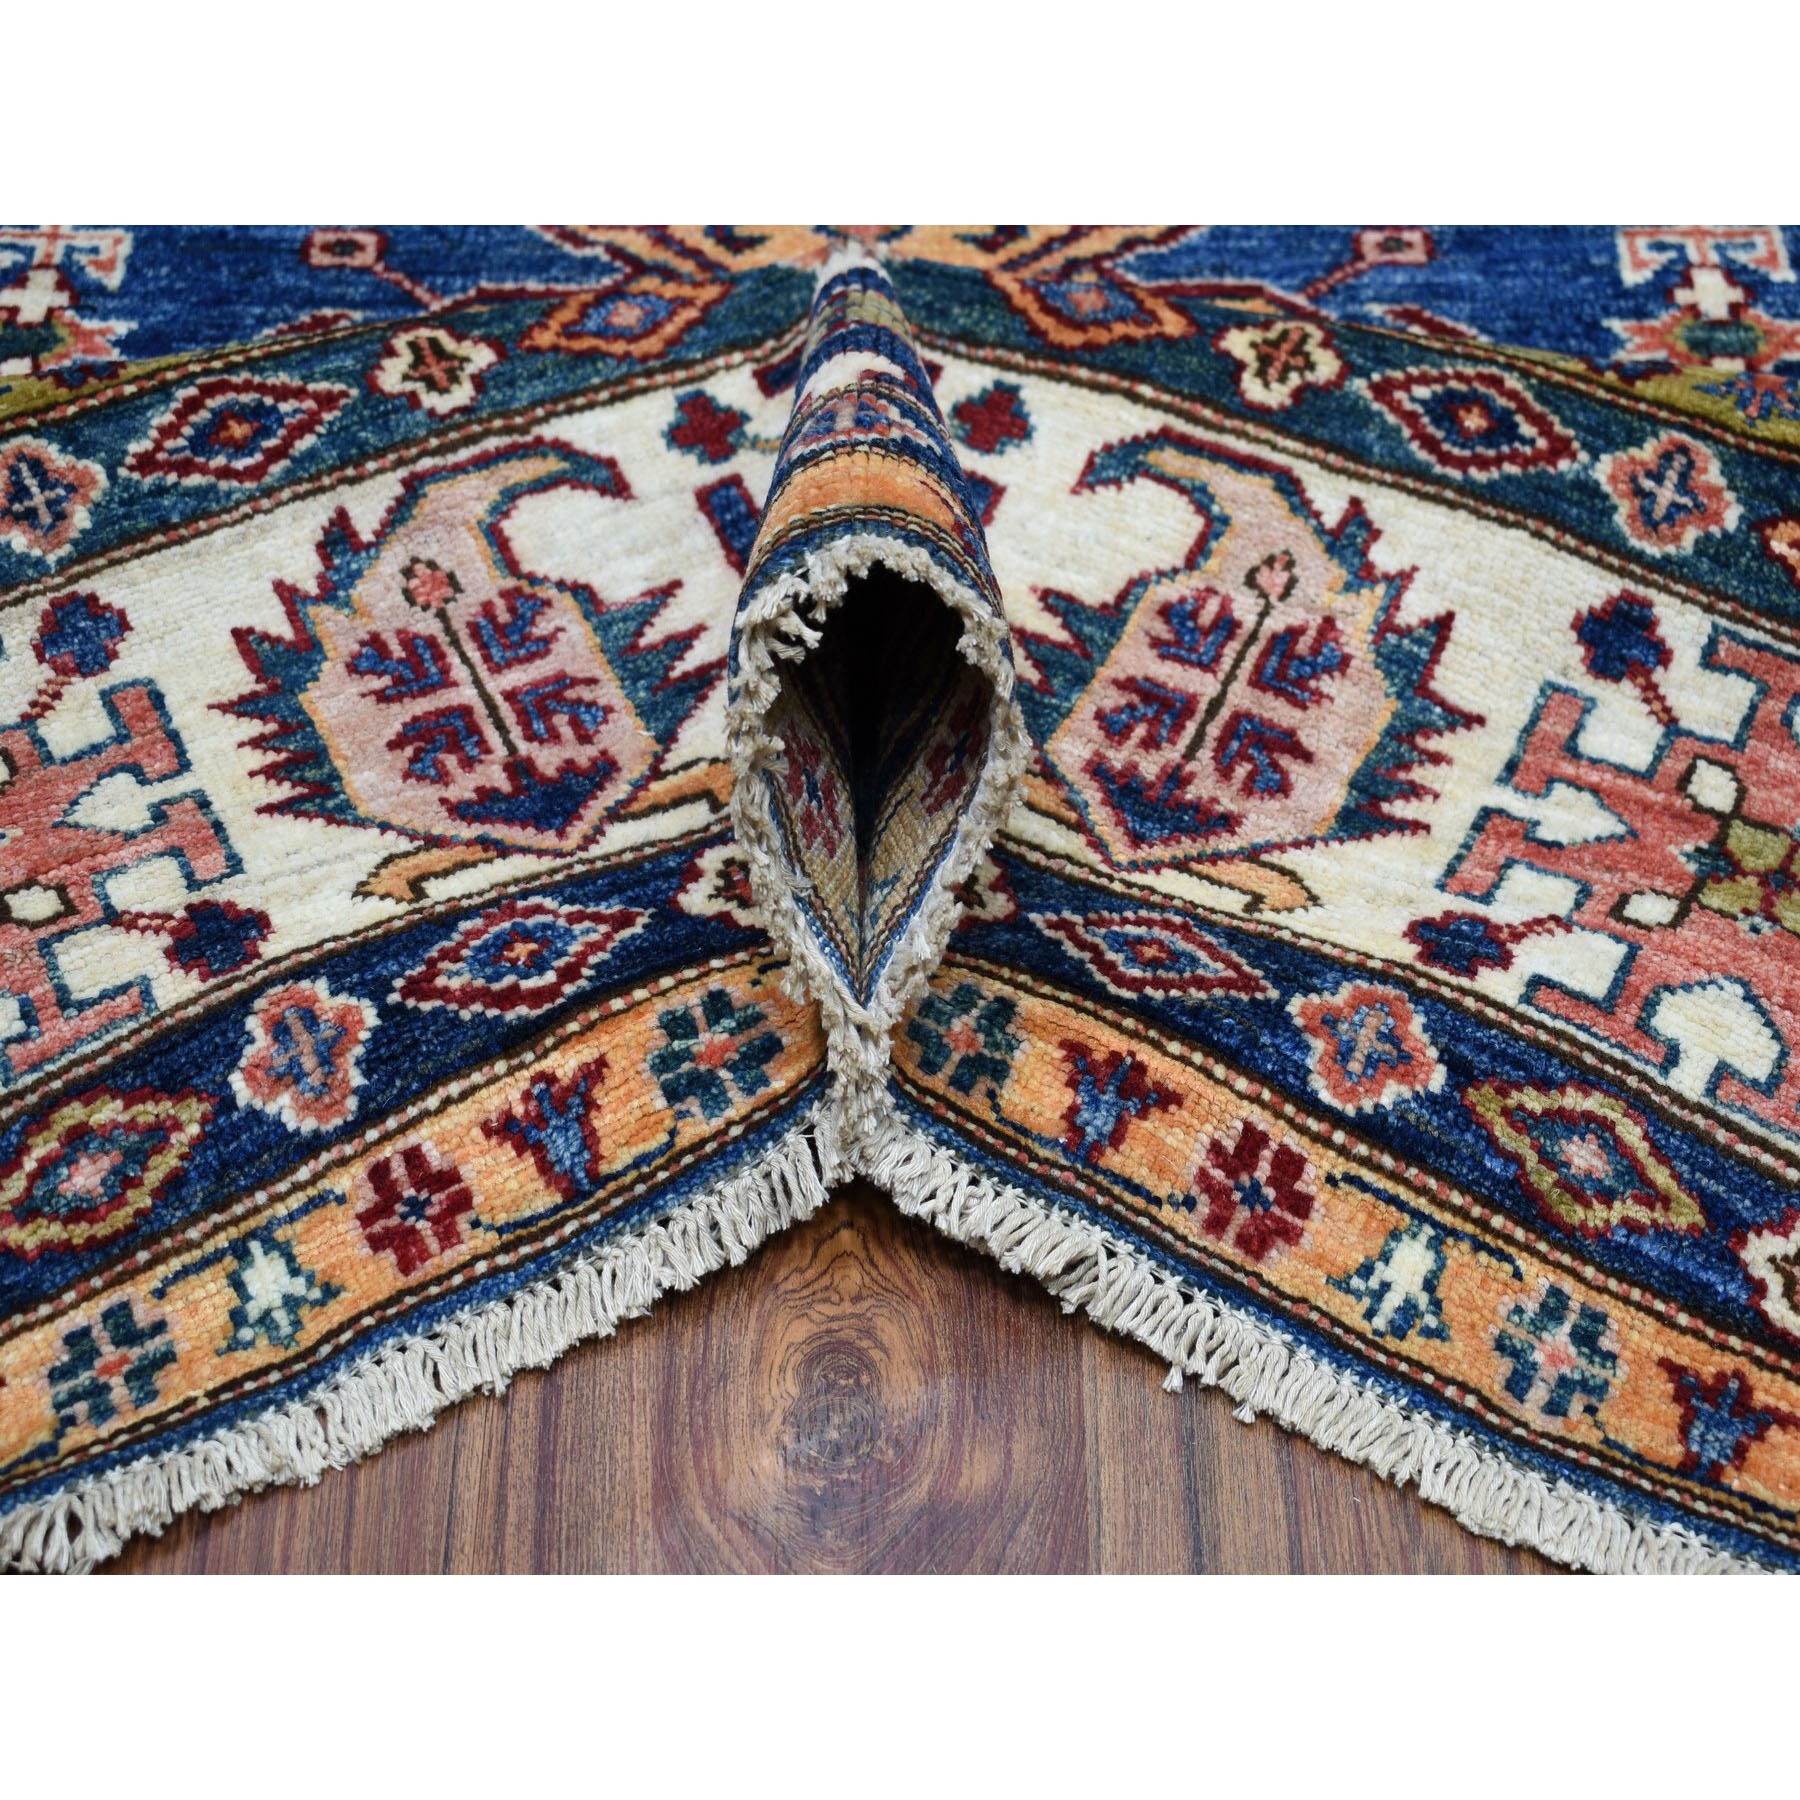 8-3 x8-3  Square Blue Super Kazak Pure Wool Hand Knotted Tribal Design Rug 